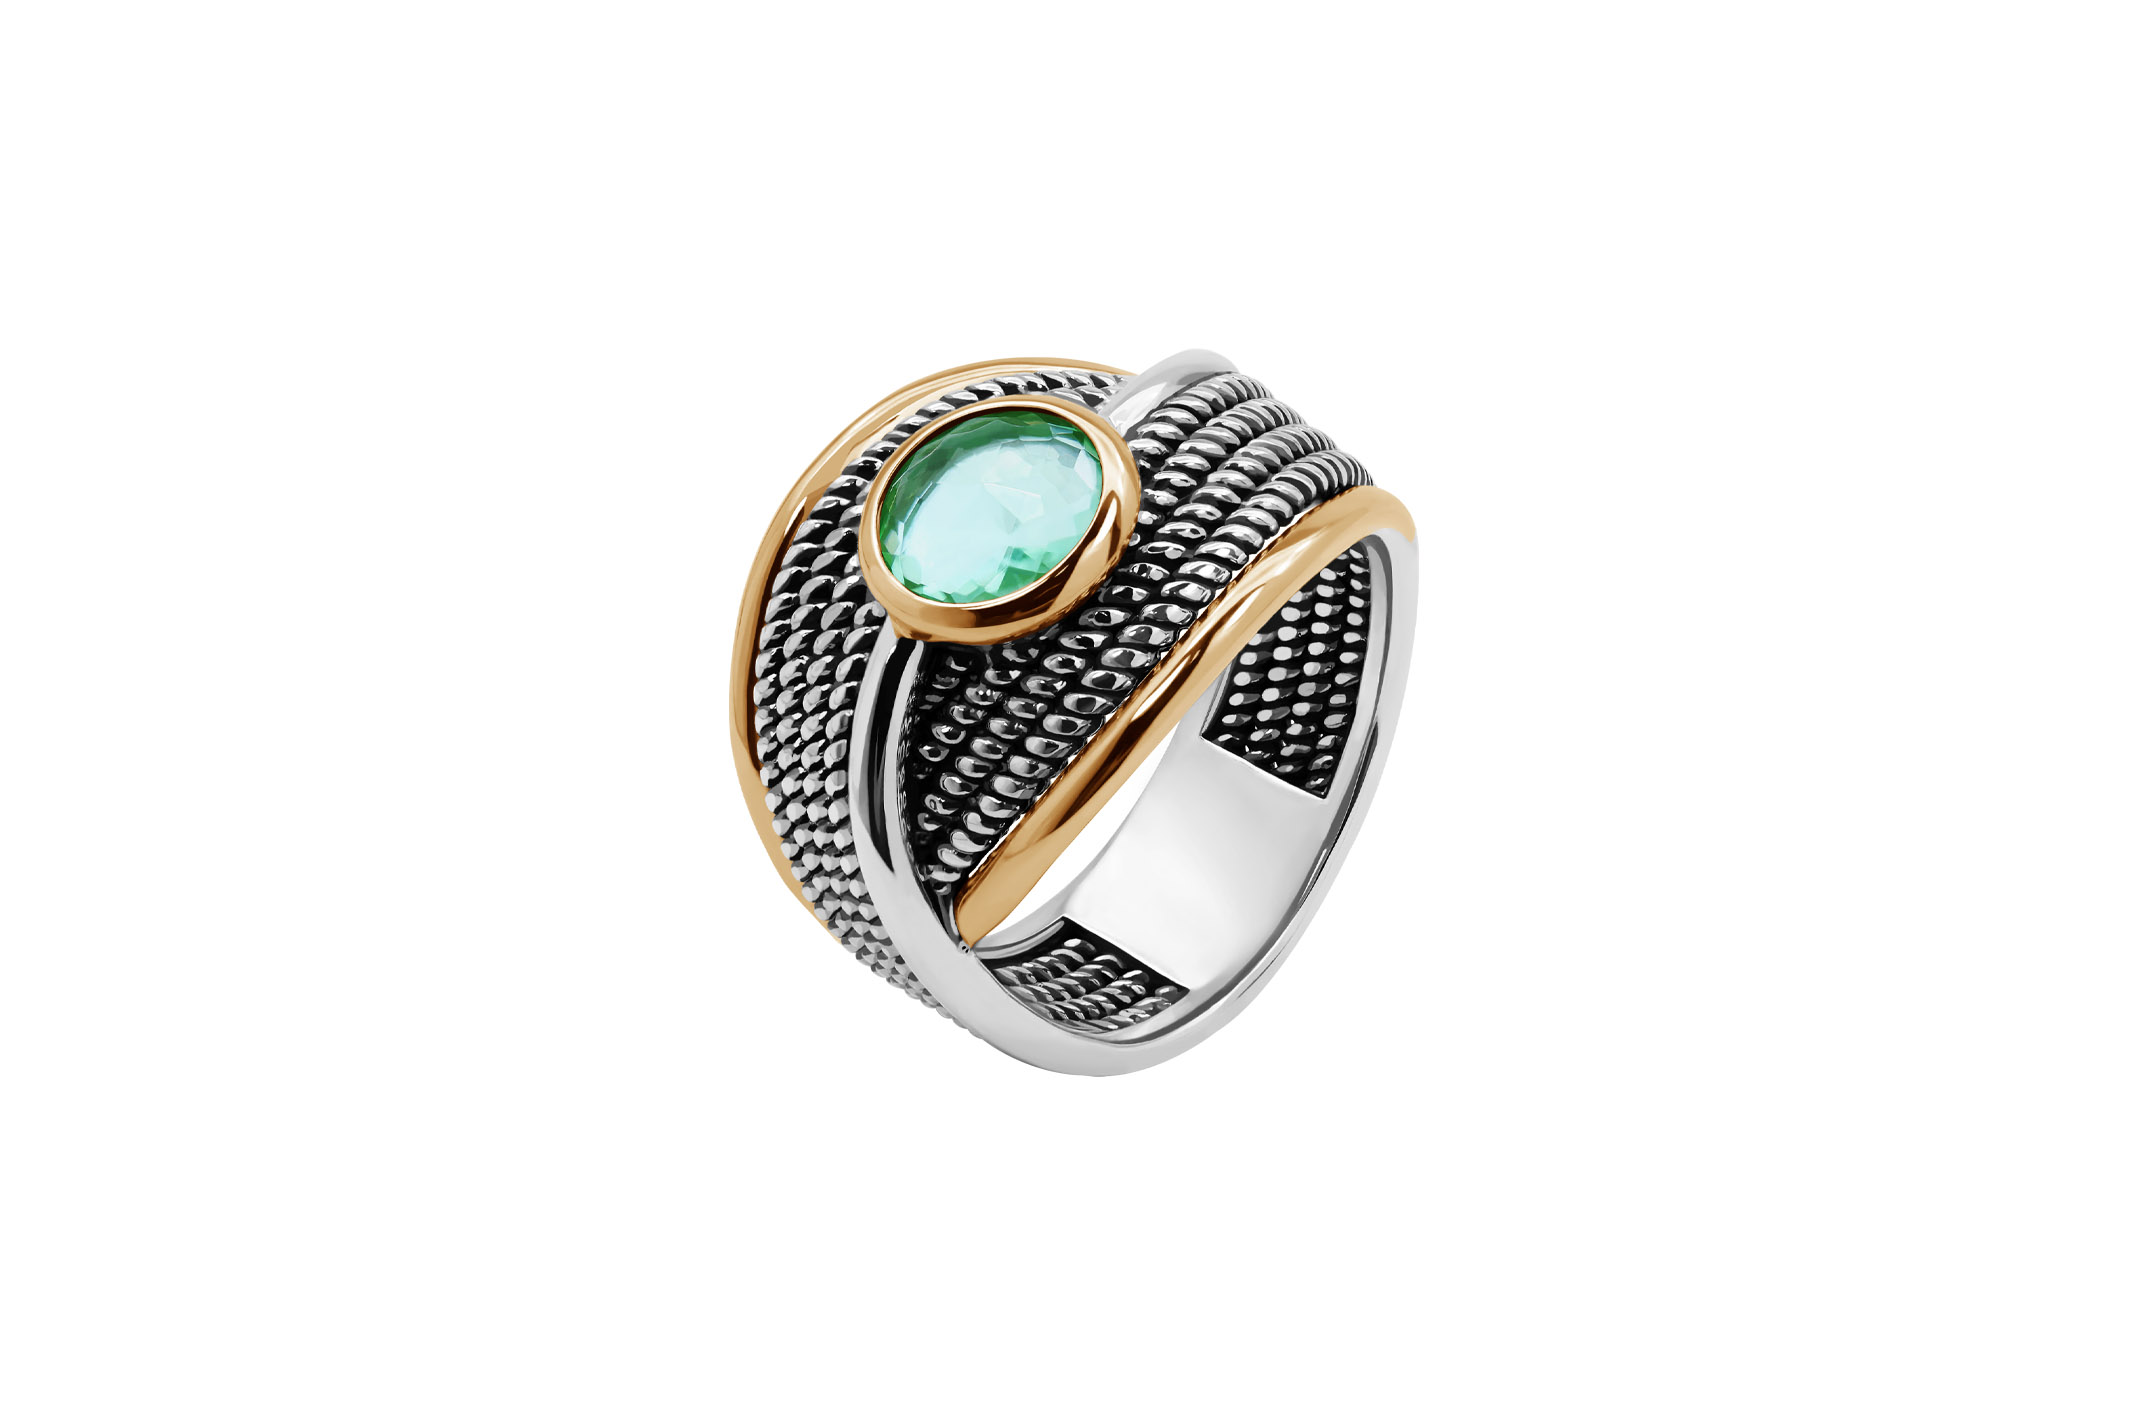 Jewel: ring;Material: 925 silver and 9K gold;Weight: 10.4 gr (silver) and 1.2 gr (gold);Stone: zirconias;Color: white and yellow;Gender: woman